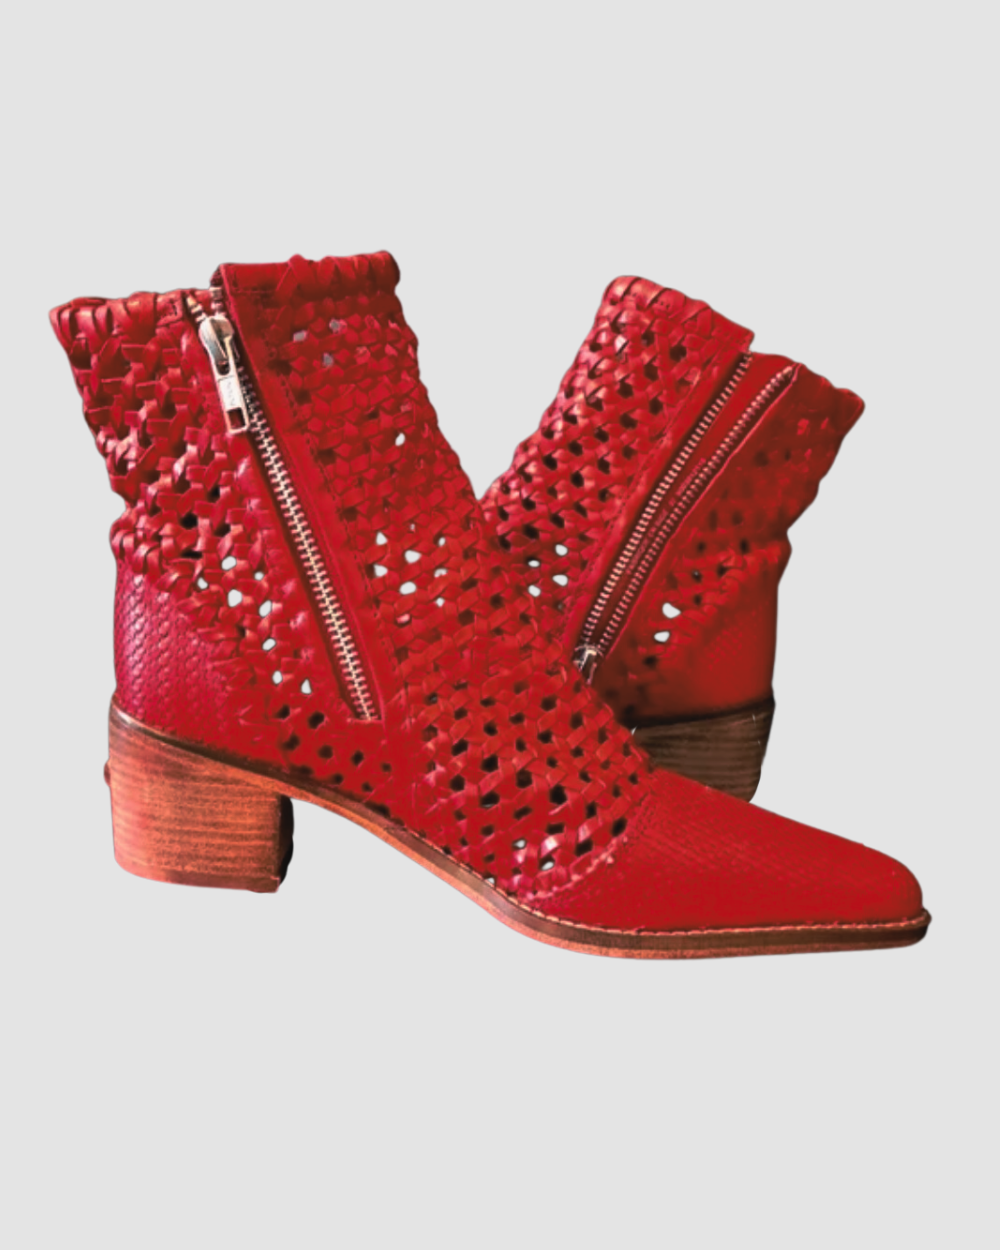 Free People Red Woven Boots, 7